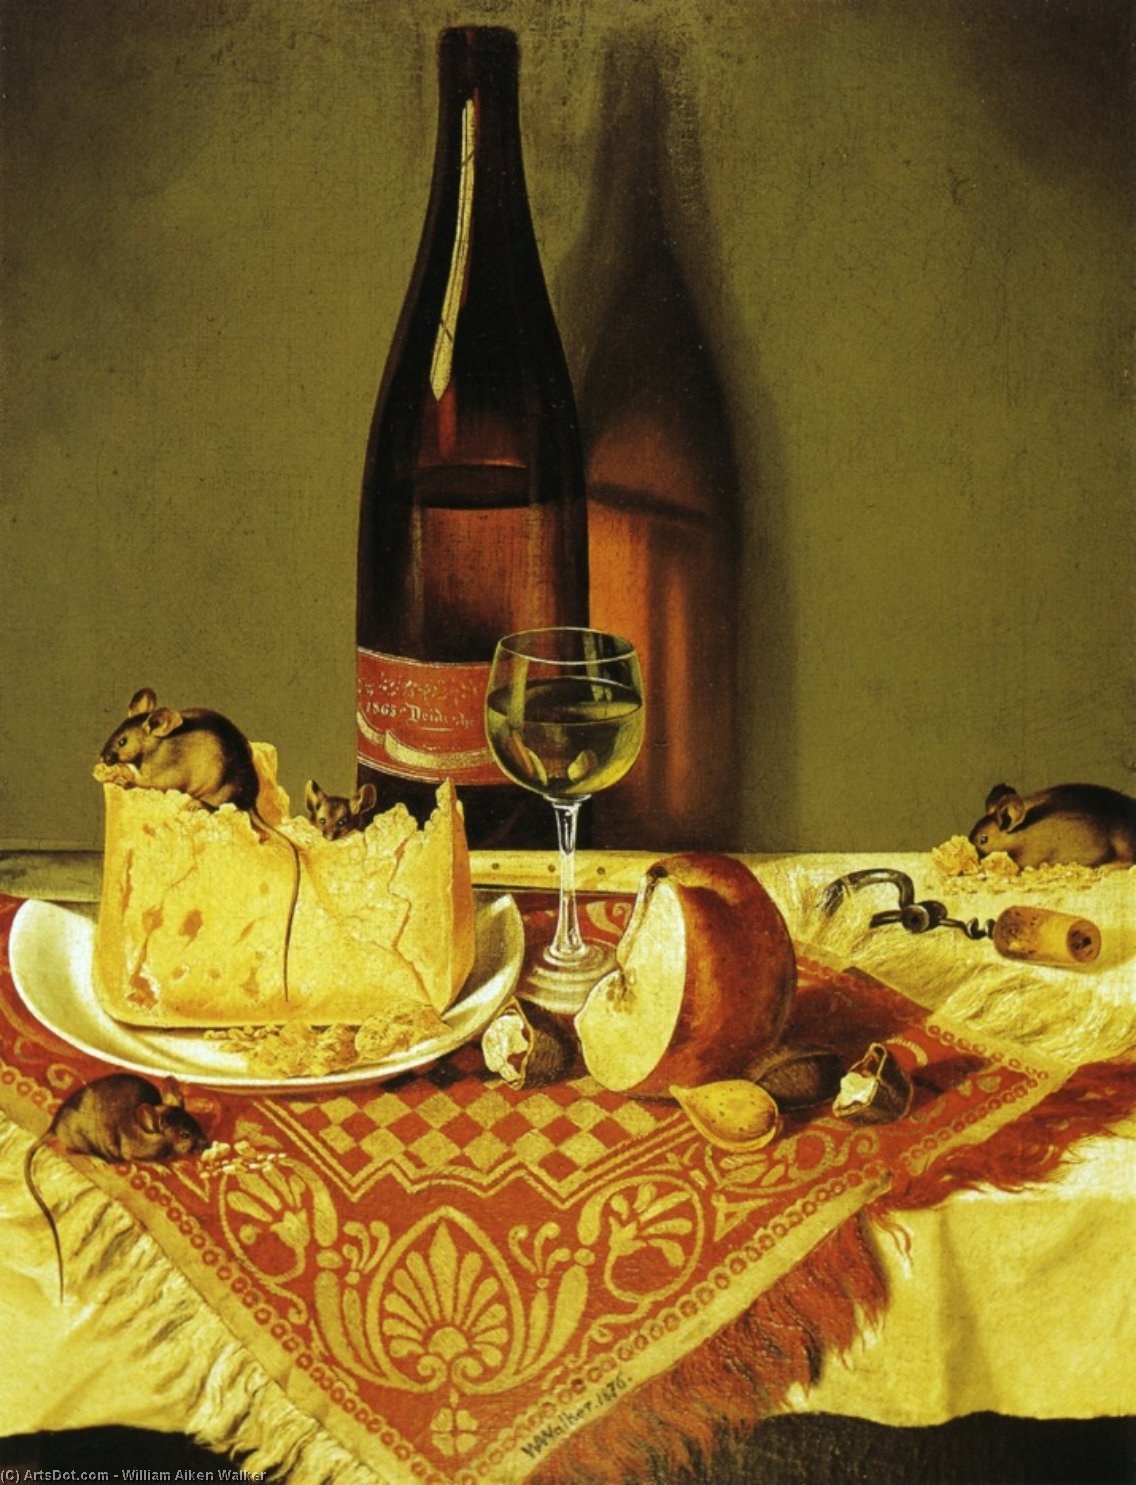 WikiOO.org - 백과 사전 - 회화, 삽화 William Aiken Walker - Still LIfe with Cheese, Bottle of Wine and Mouse